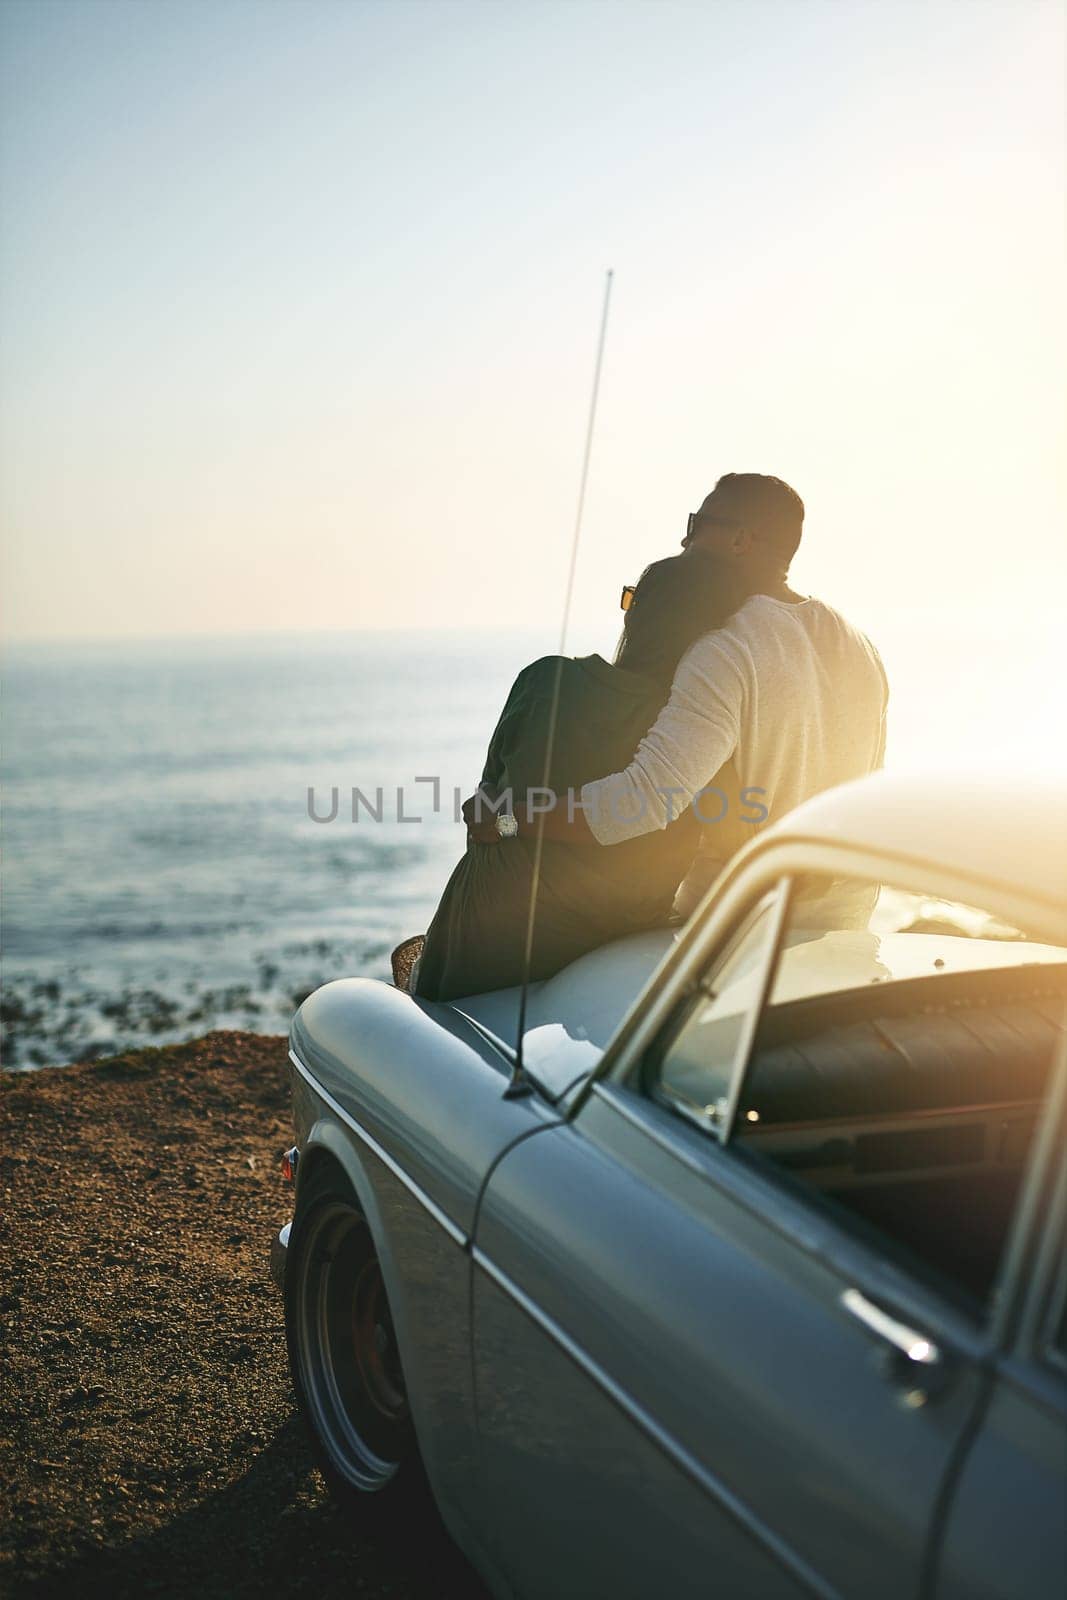 Go and see the beauty in the world. a young couple making a stop at the beach while out on a road trip